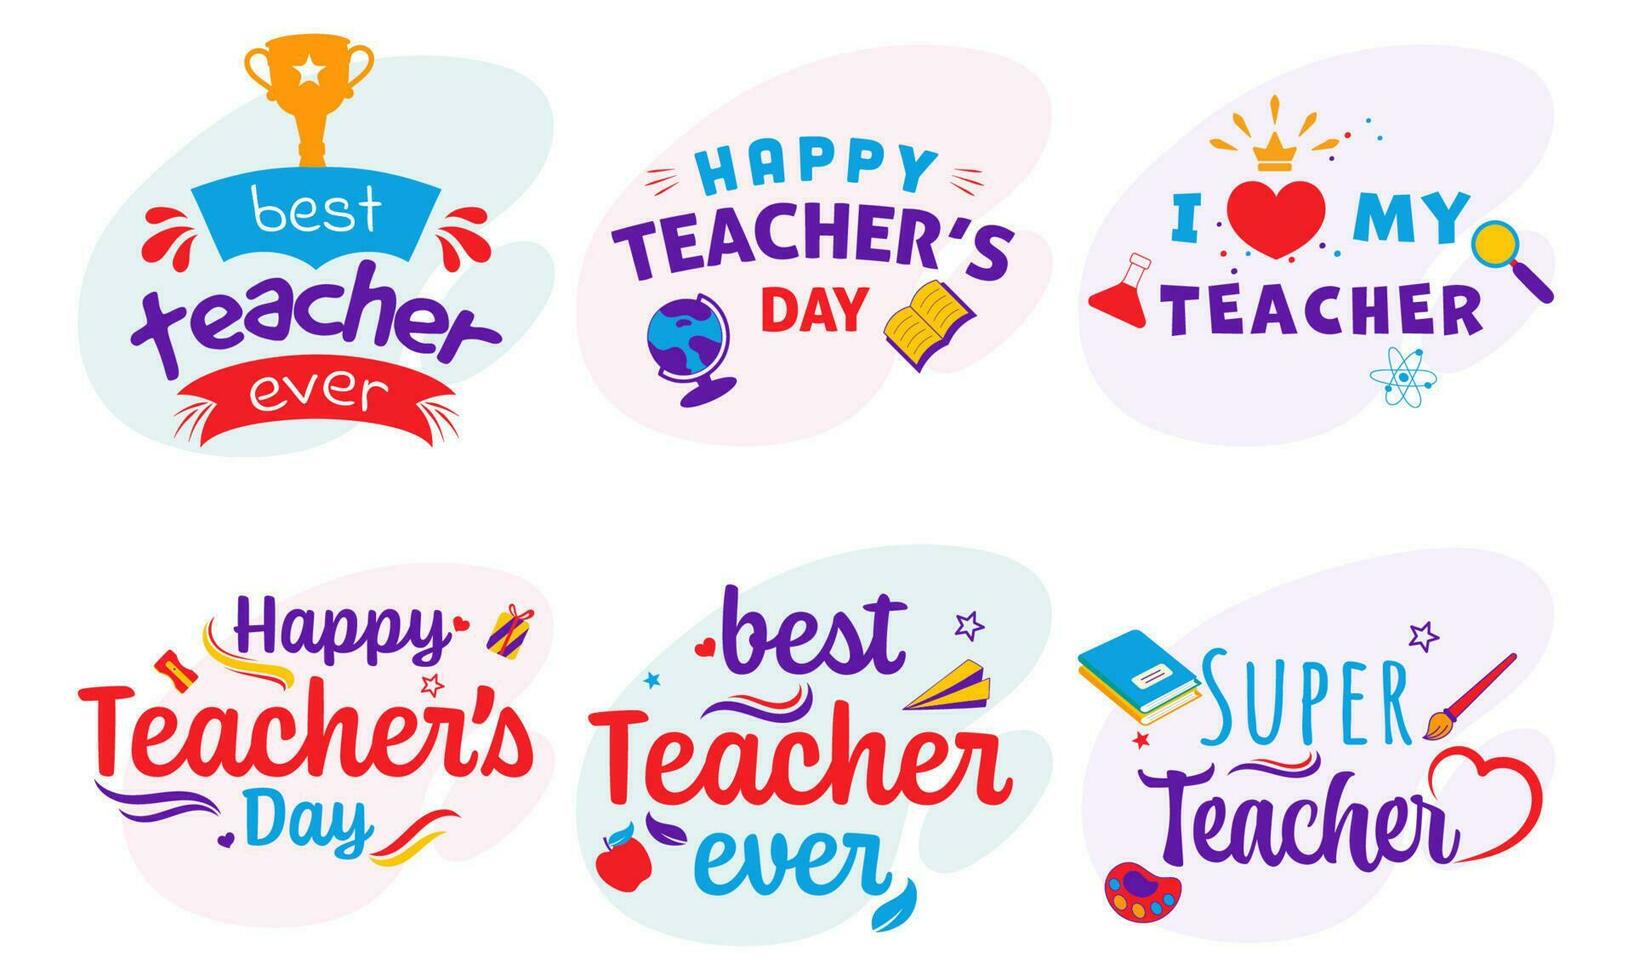 Happy Teacher's Day Quote Set Against Background. vector